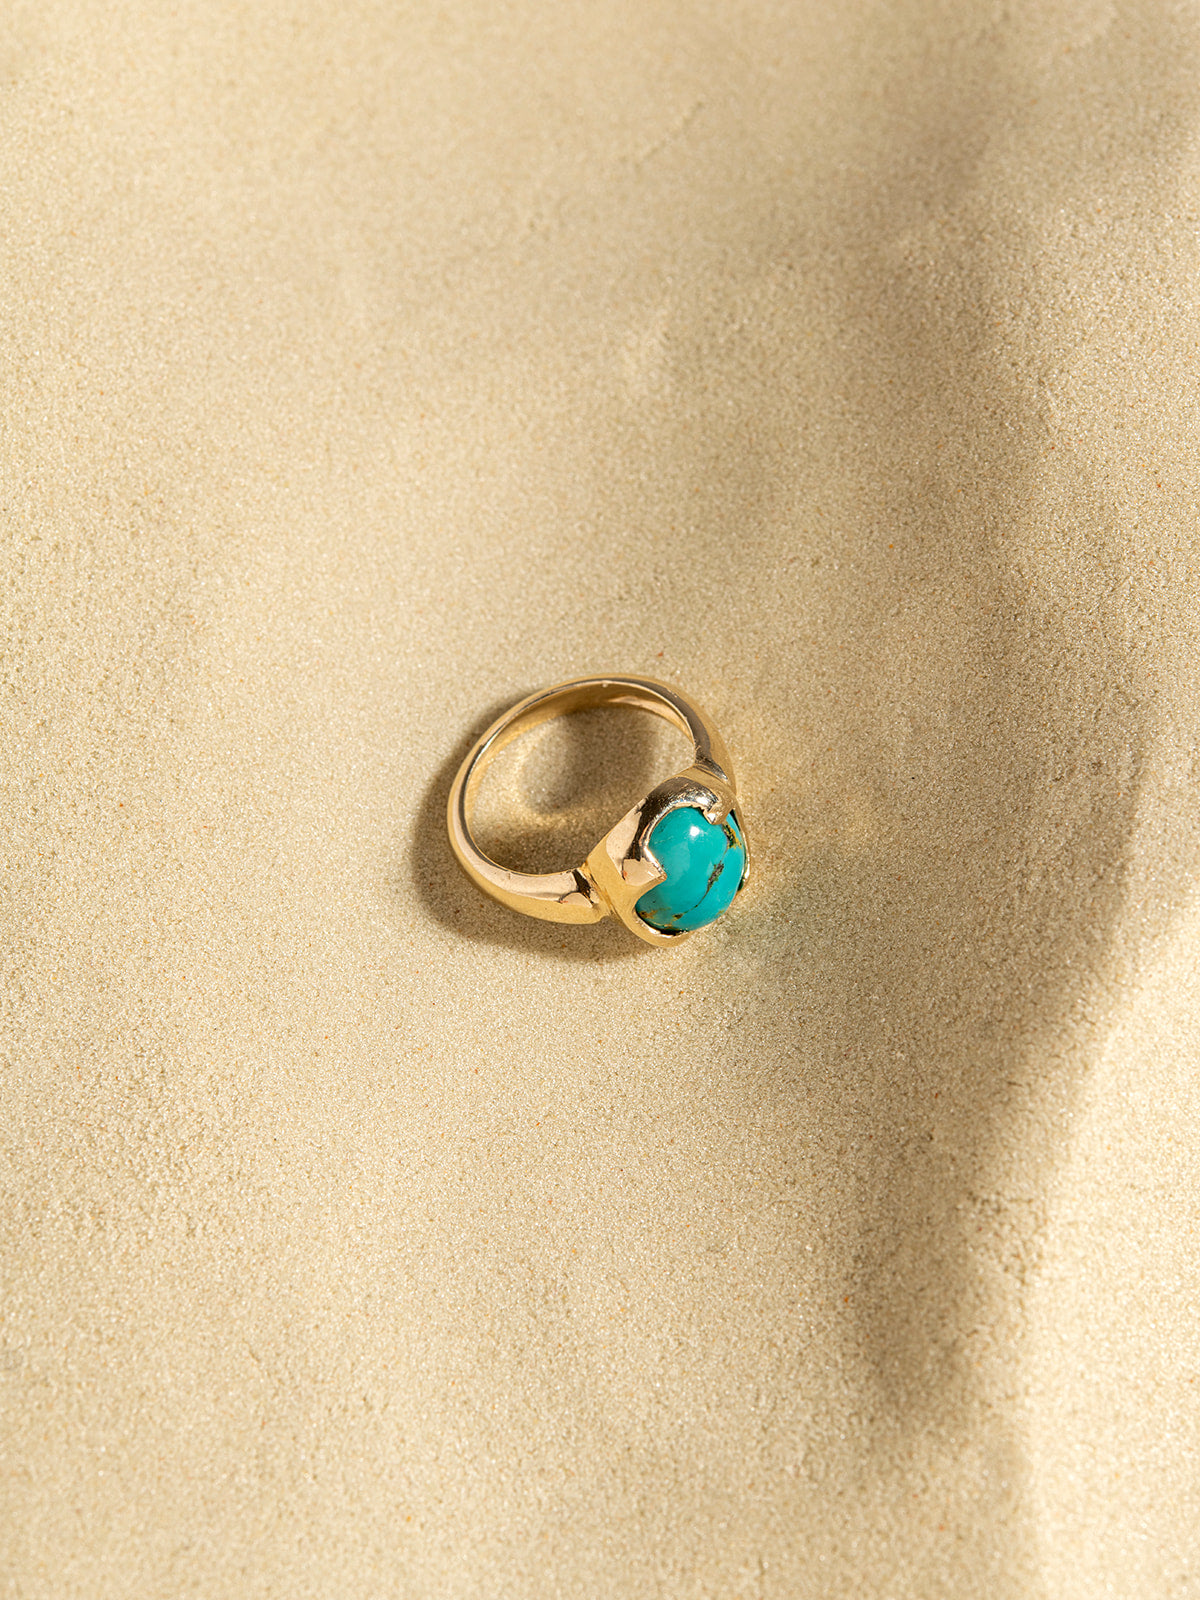 Turquoise Claw Ring in 14K